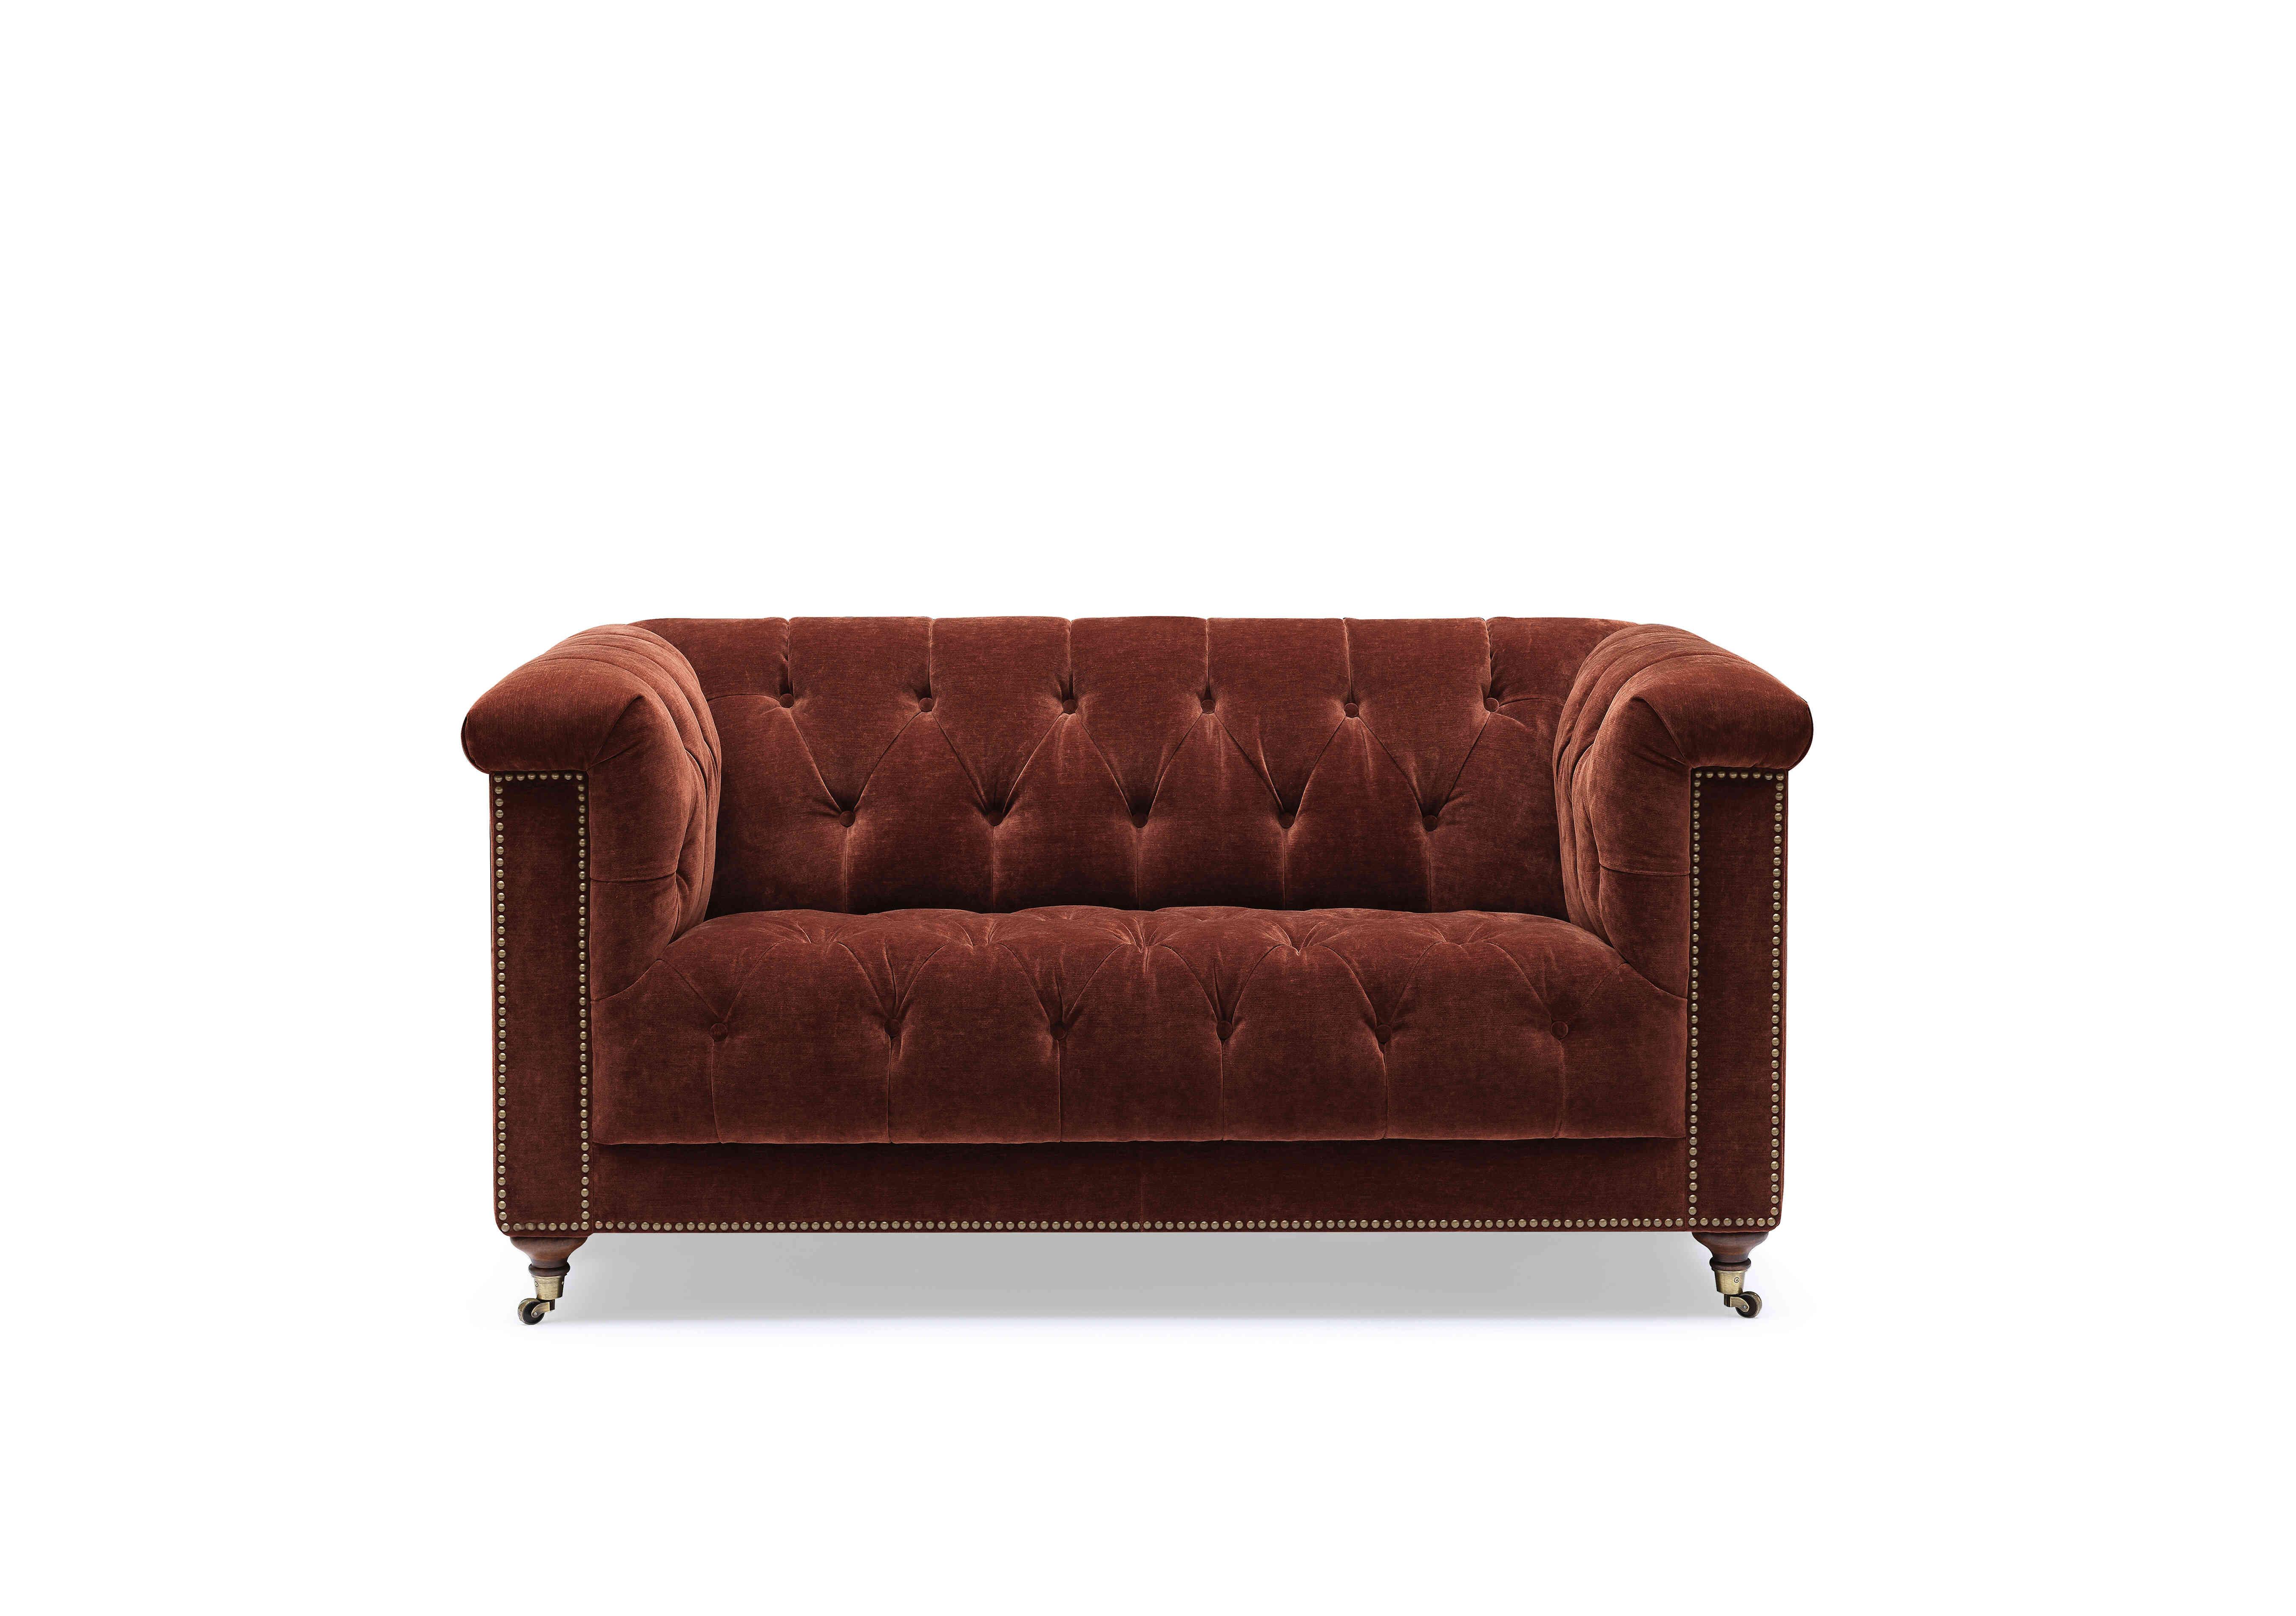 Wallace 2 Seater Fabric Chesterfield Sofa with USB-C in X3y1-W019 Tawny on Furniture Village